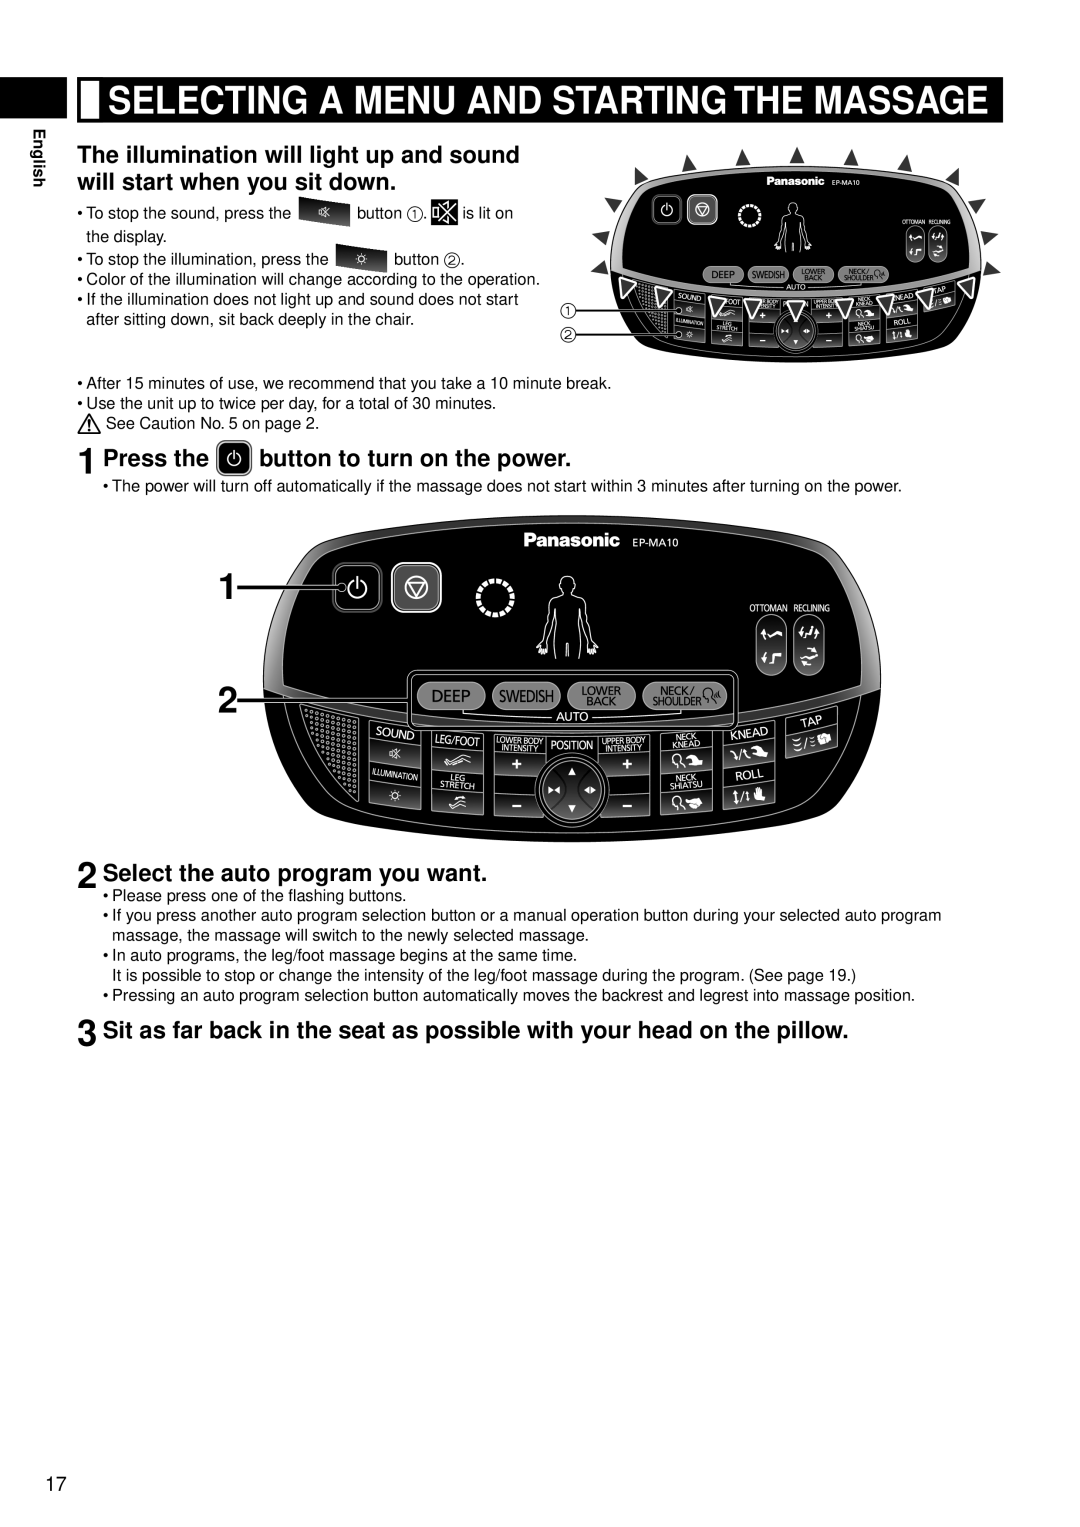 Panasonic EP-MA10 manual Selecting A Menu And Starting The Massage, Press the button to turn on the power 